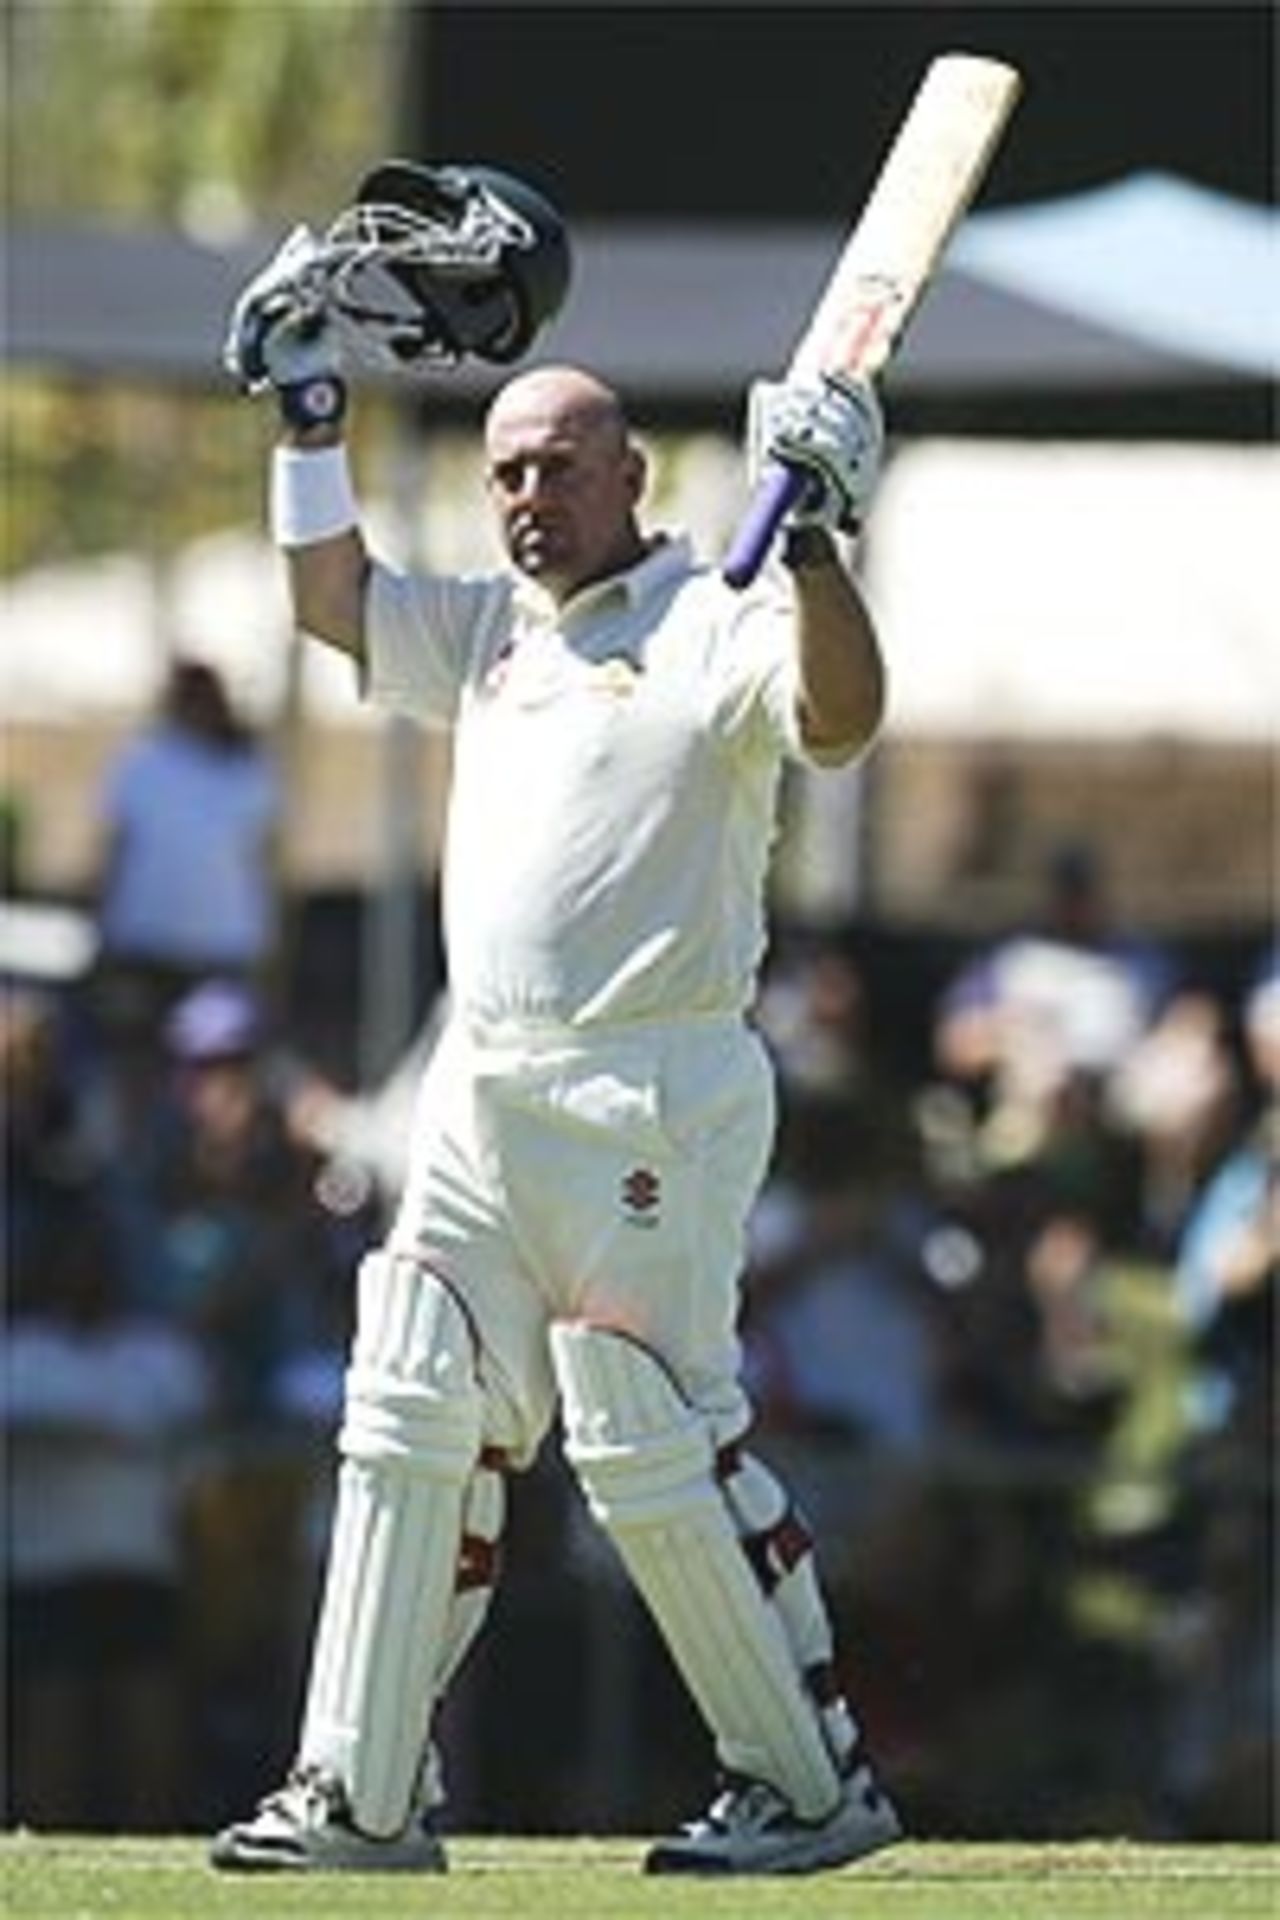 DARWIN - JULY 19: Darren Lehmann of Australia celebrates his century on July 19, 2003 during day two of the First Test between Australia and Bangladesh played at Marrara Oval, Darwin, Australia.